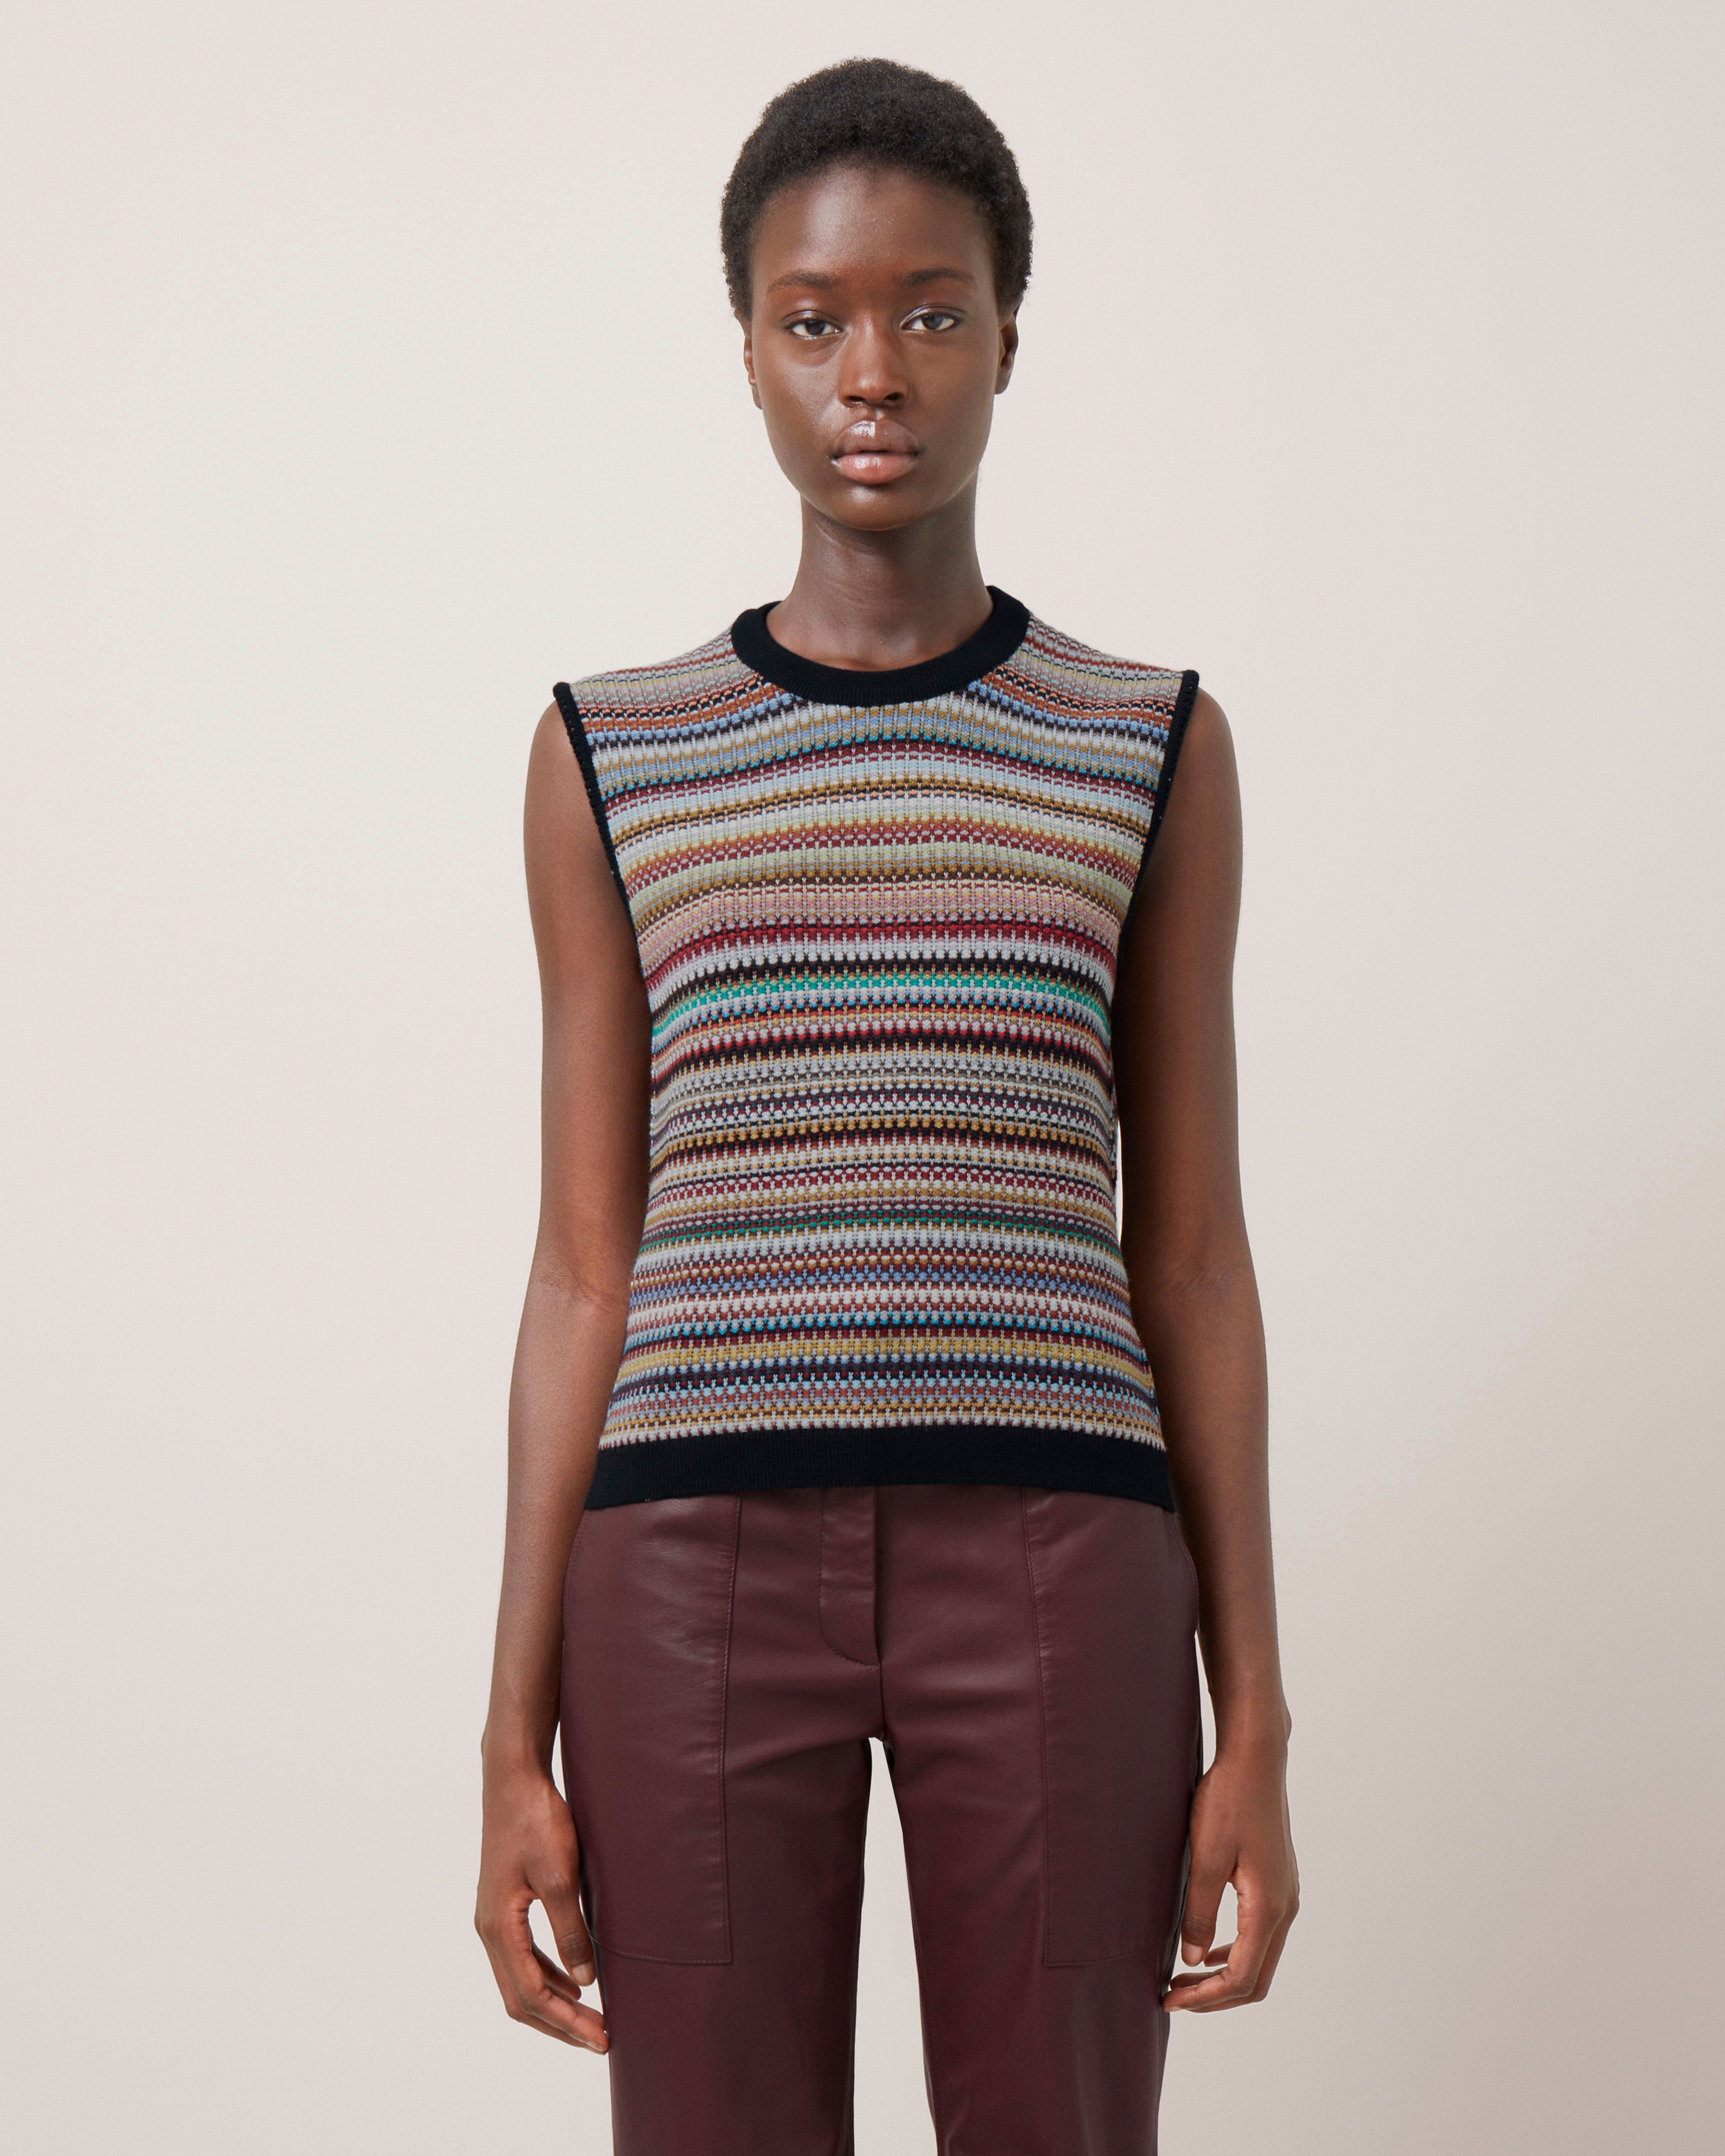 model wearing mulberry Paul Smith Women's Knitted Vest striped